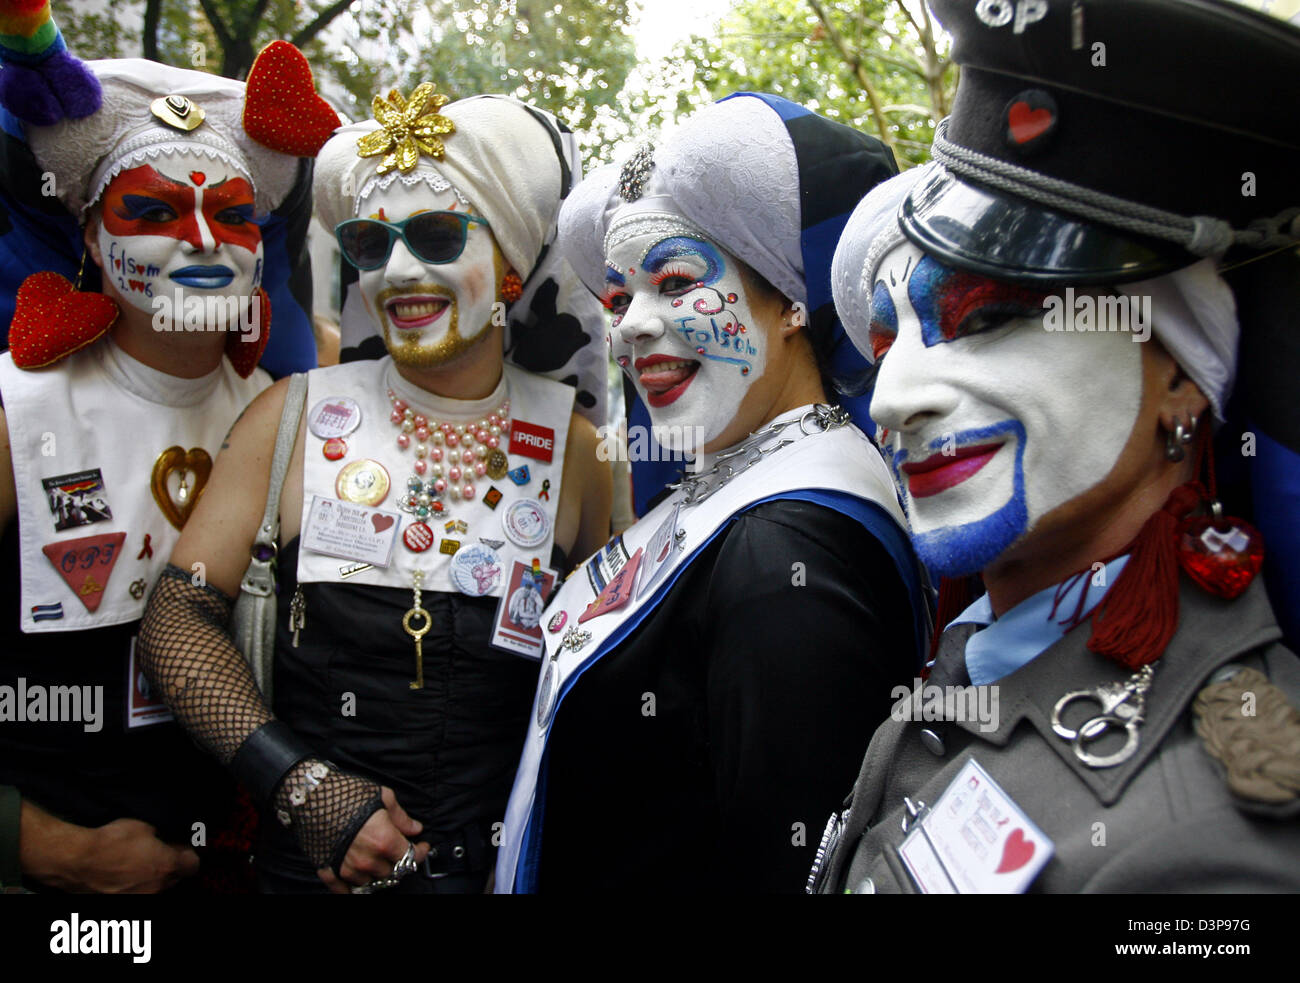 Four participants in the Folsom Europe Festival pictured in Berlin,  Germany, 02 Septemebr 2006. For the